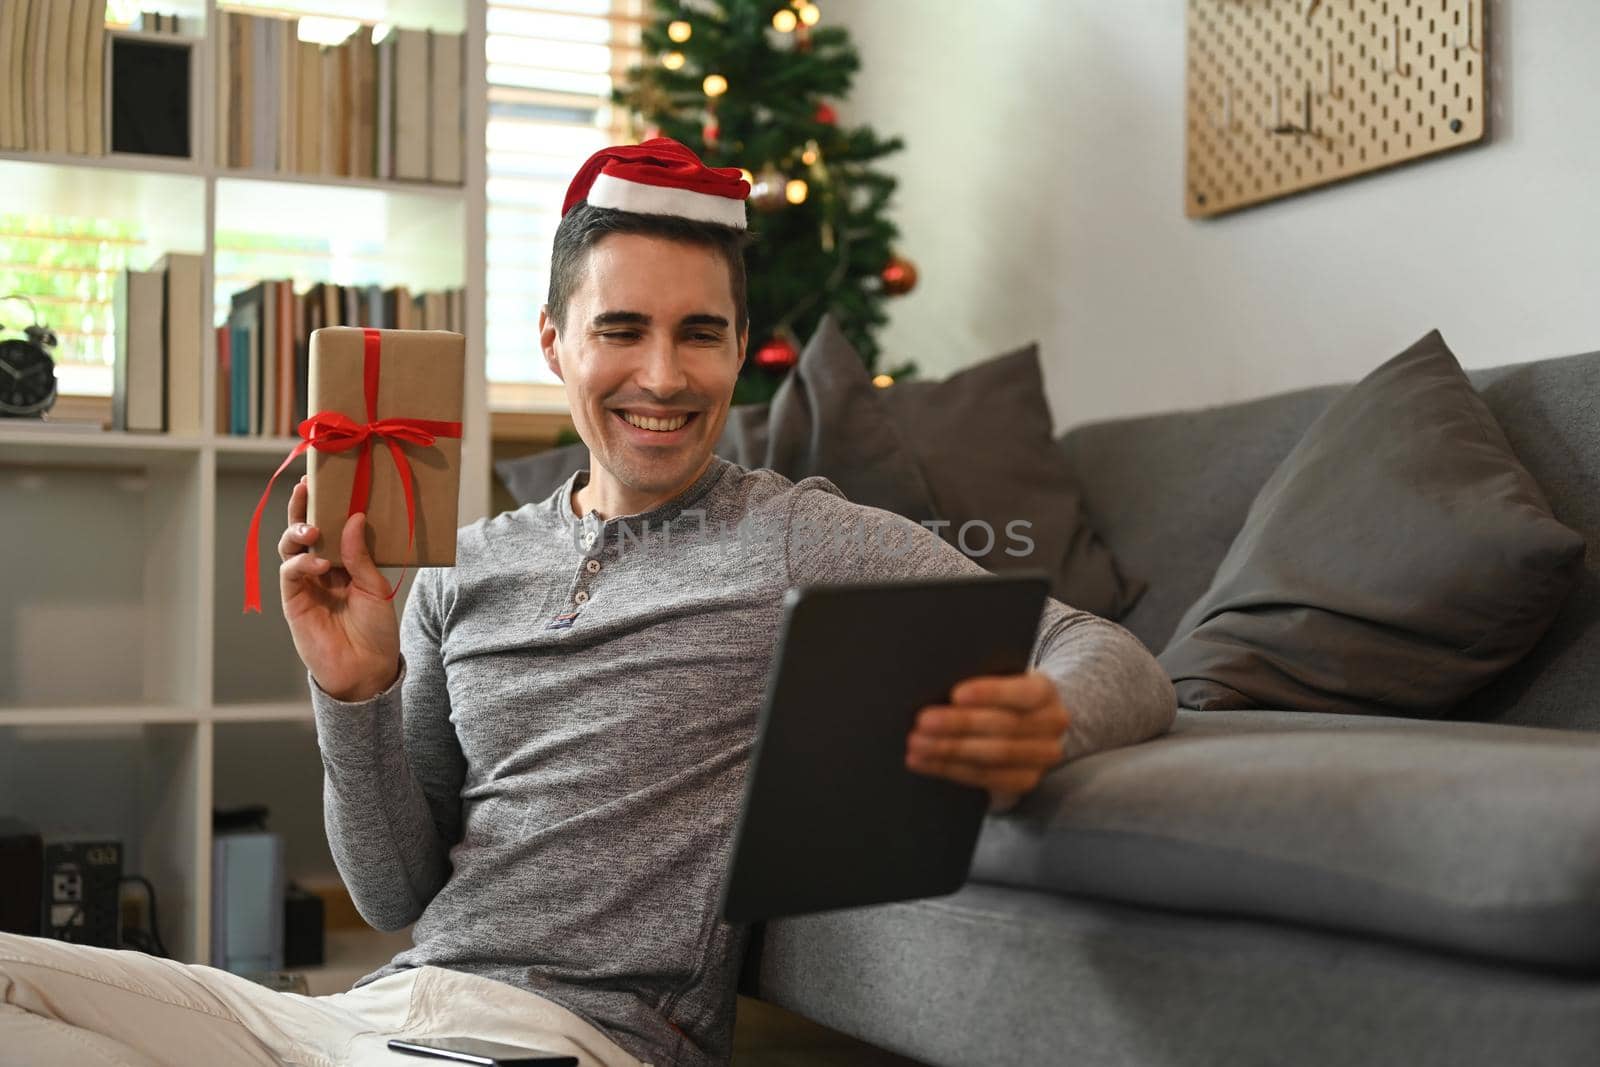 Smiling man wearing Santa hat showing Christmas gift box and talking with family or her friend on digital tablet.